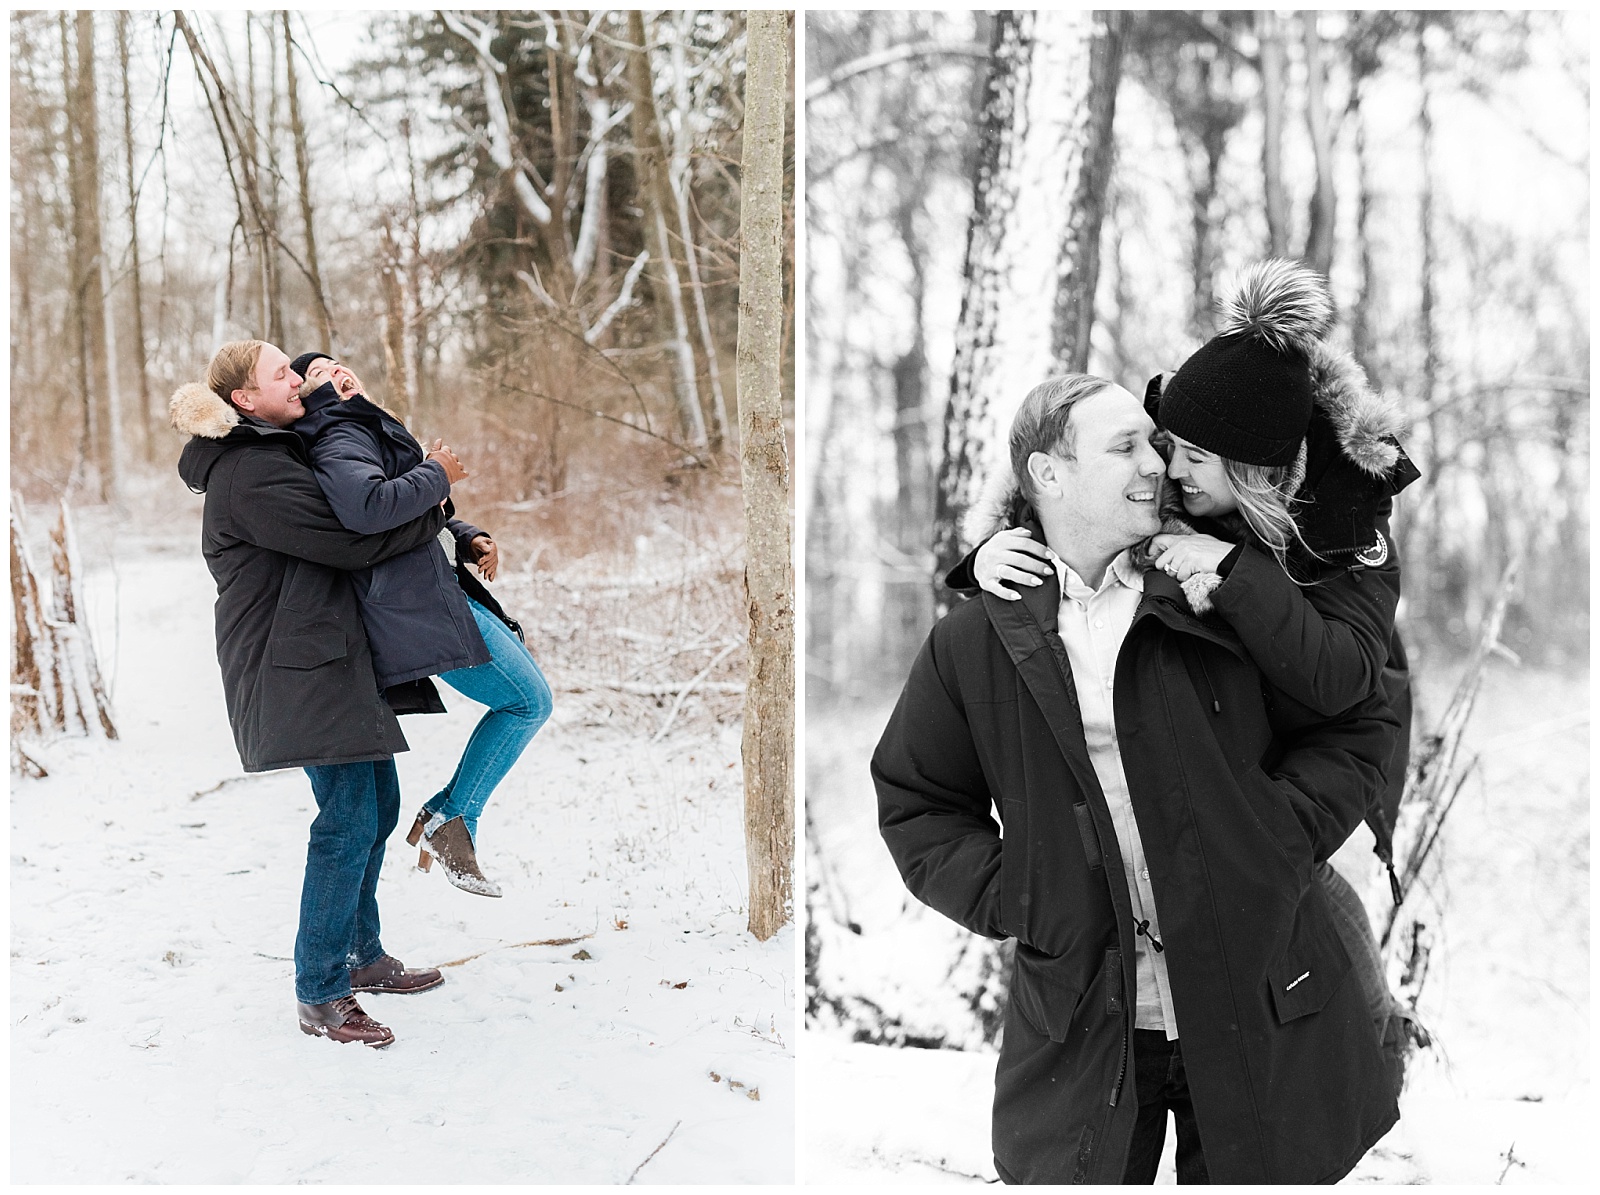 New Jersey Engagement Session, Snowy, Winter, Cozy, Session, Wedding Photographer, Cross Estate Gardens, Snow, Wintry, Light and Airy, Woods, Forest